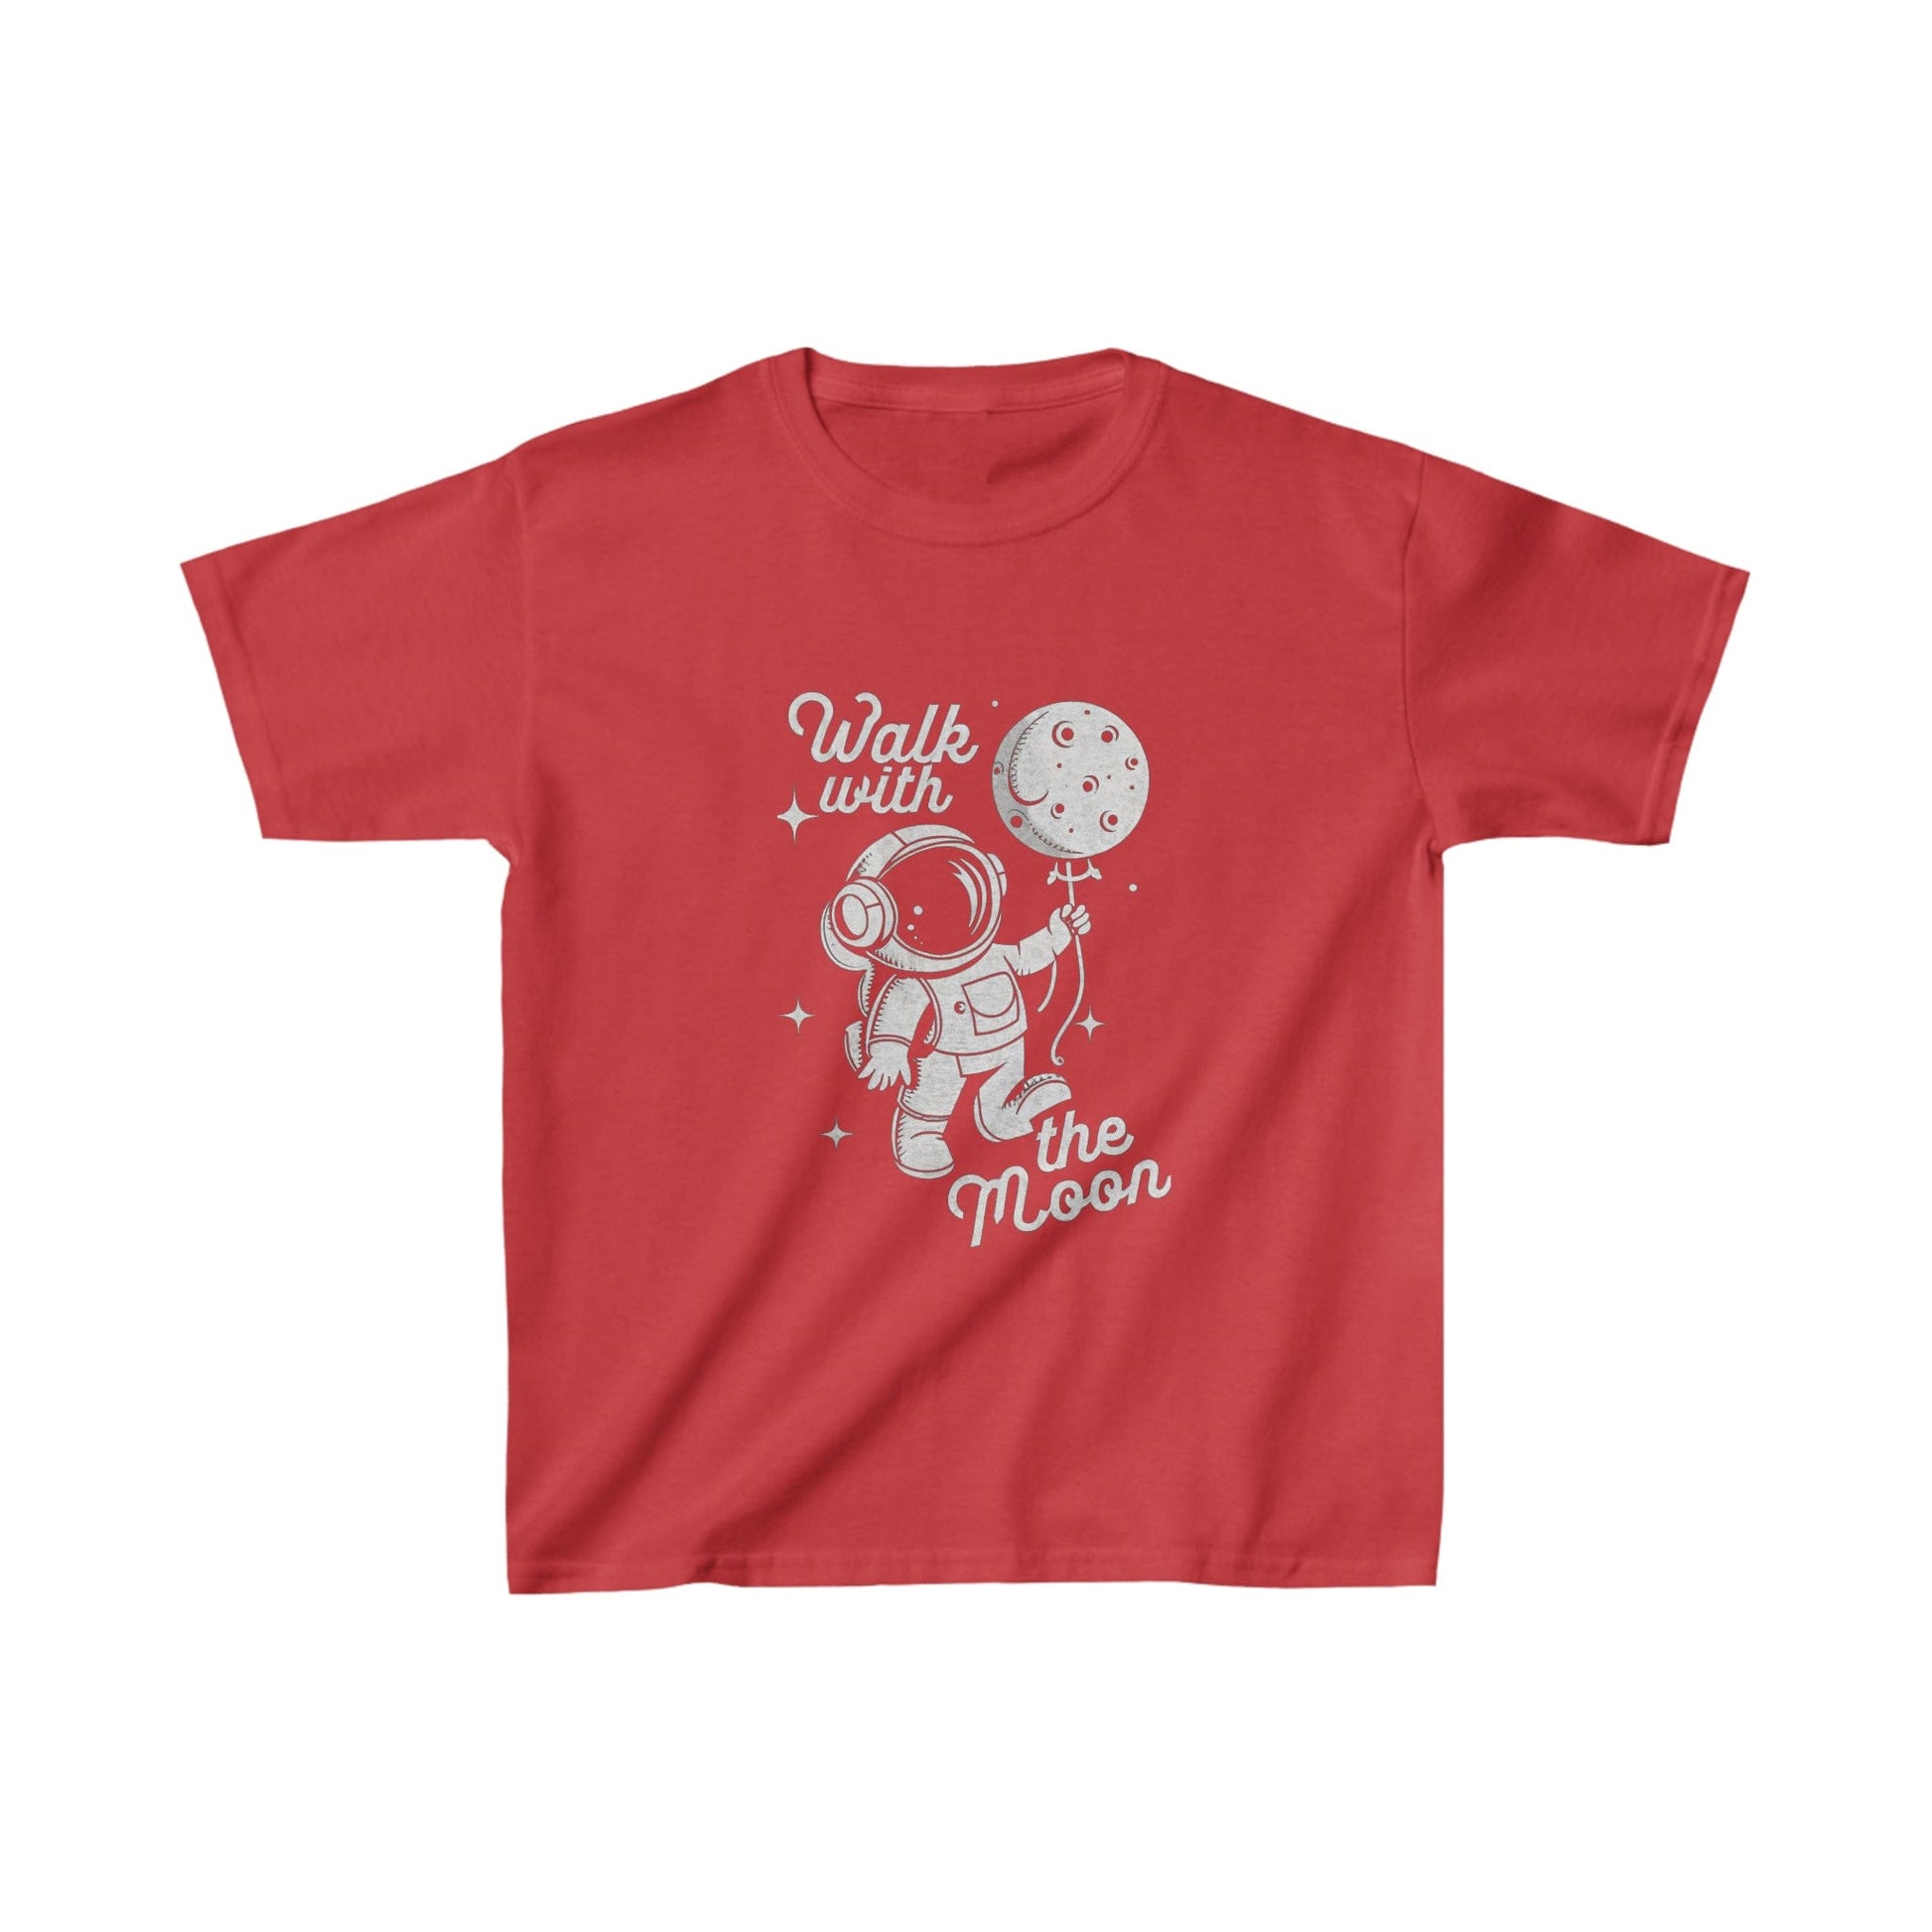 Kids clothes XS / Red Youth Walk with the Moon T-Shirt